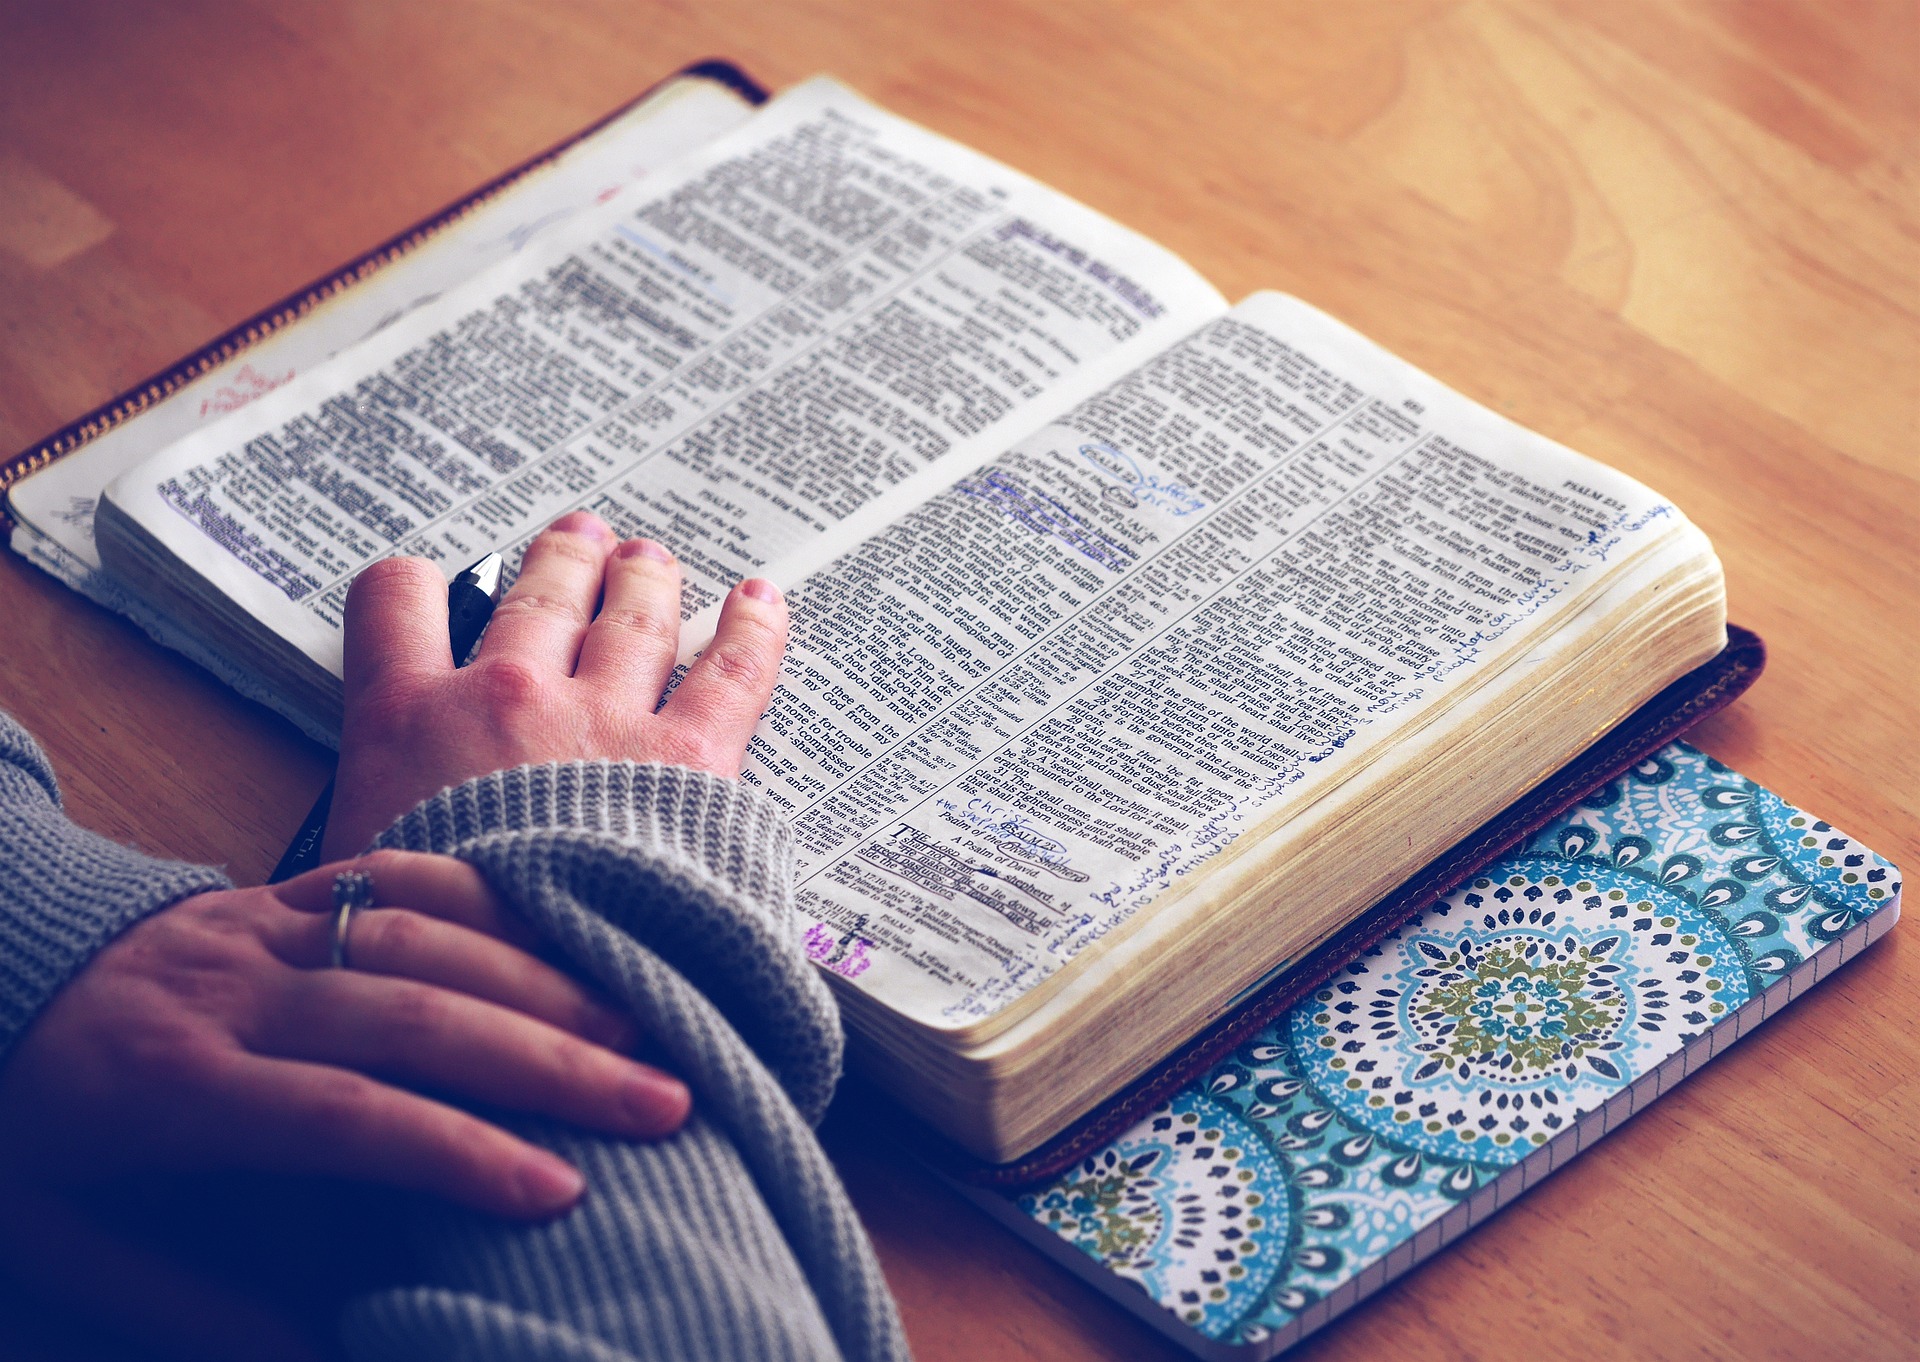 What does the bible say about faith which works?